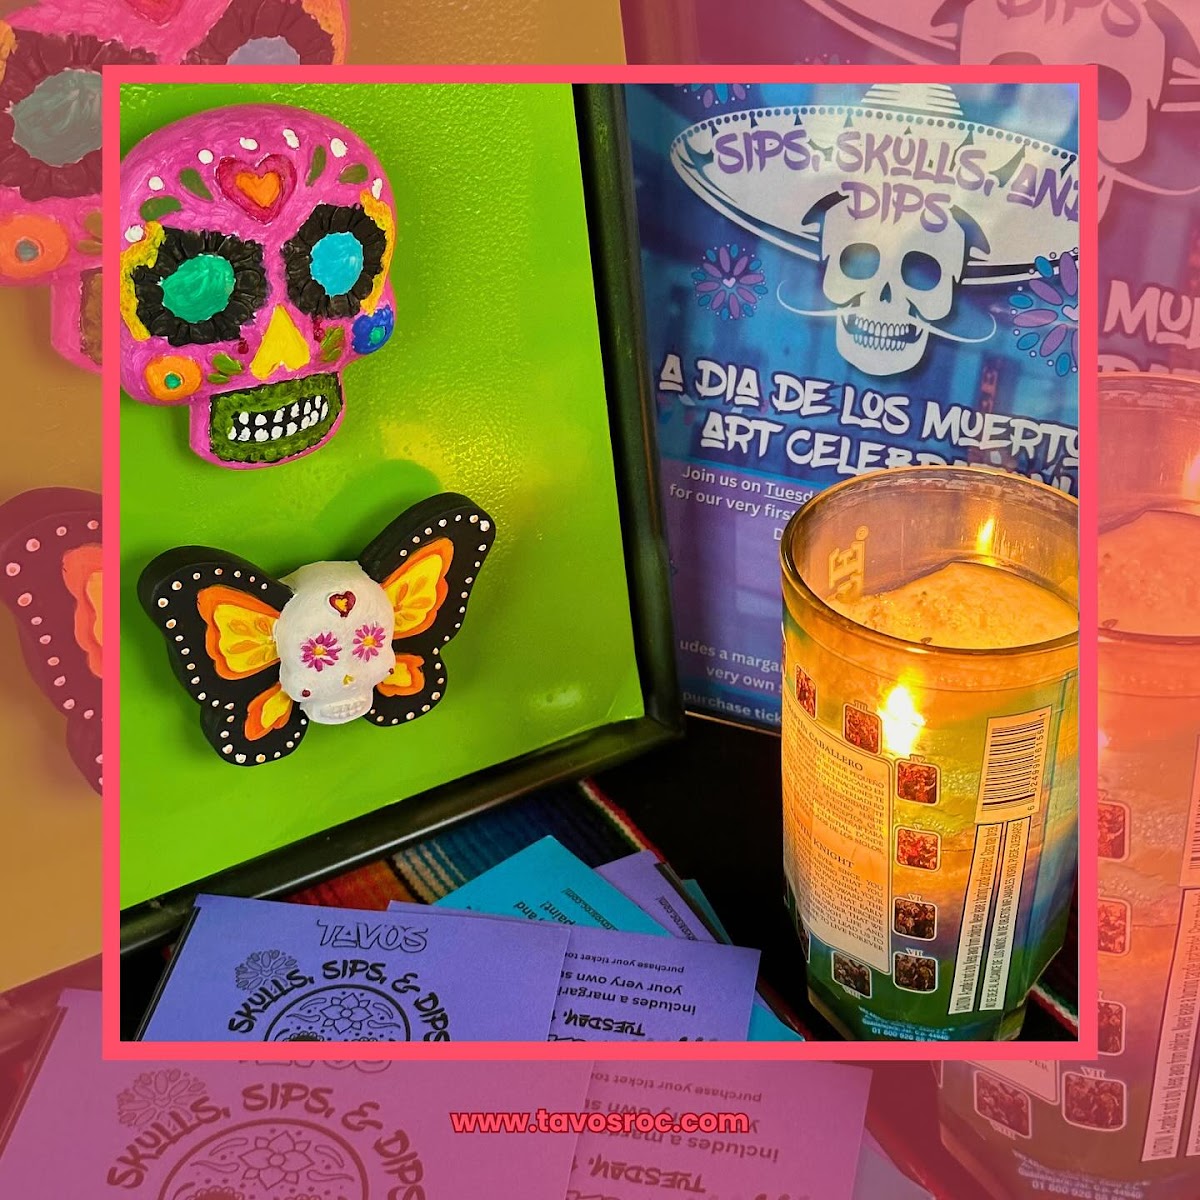 🎨💀 Last night's Sips, Skulls, and Dips was an absolute fiesta! 🌟✨ Our amigos painted these incredible skulls, and the fun's not over! 
It was such a blast that we're extending the creative madness until 11/4 (while supplies last!)
$45 gets you a ticket and you get to paint a skull, enjoy a margarita, and snack on some delicious Pico De Gallo! Join us in embracing the artistic spirit the next time you come in!